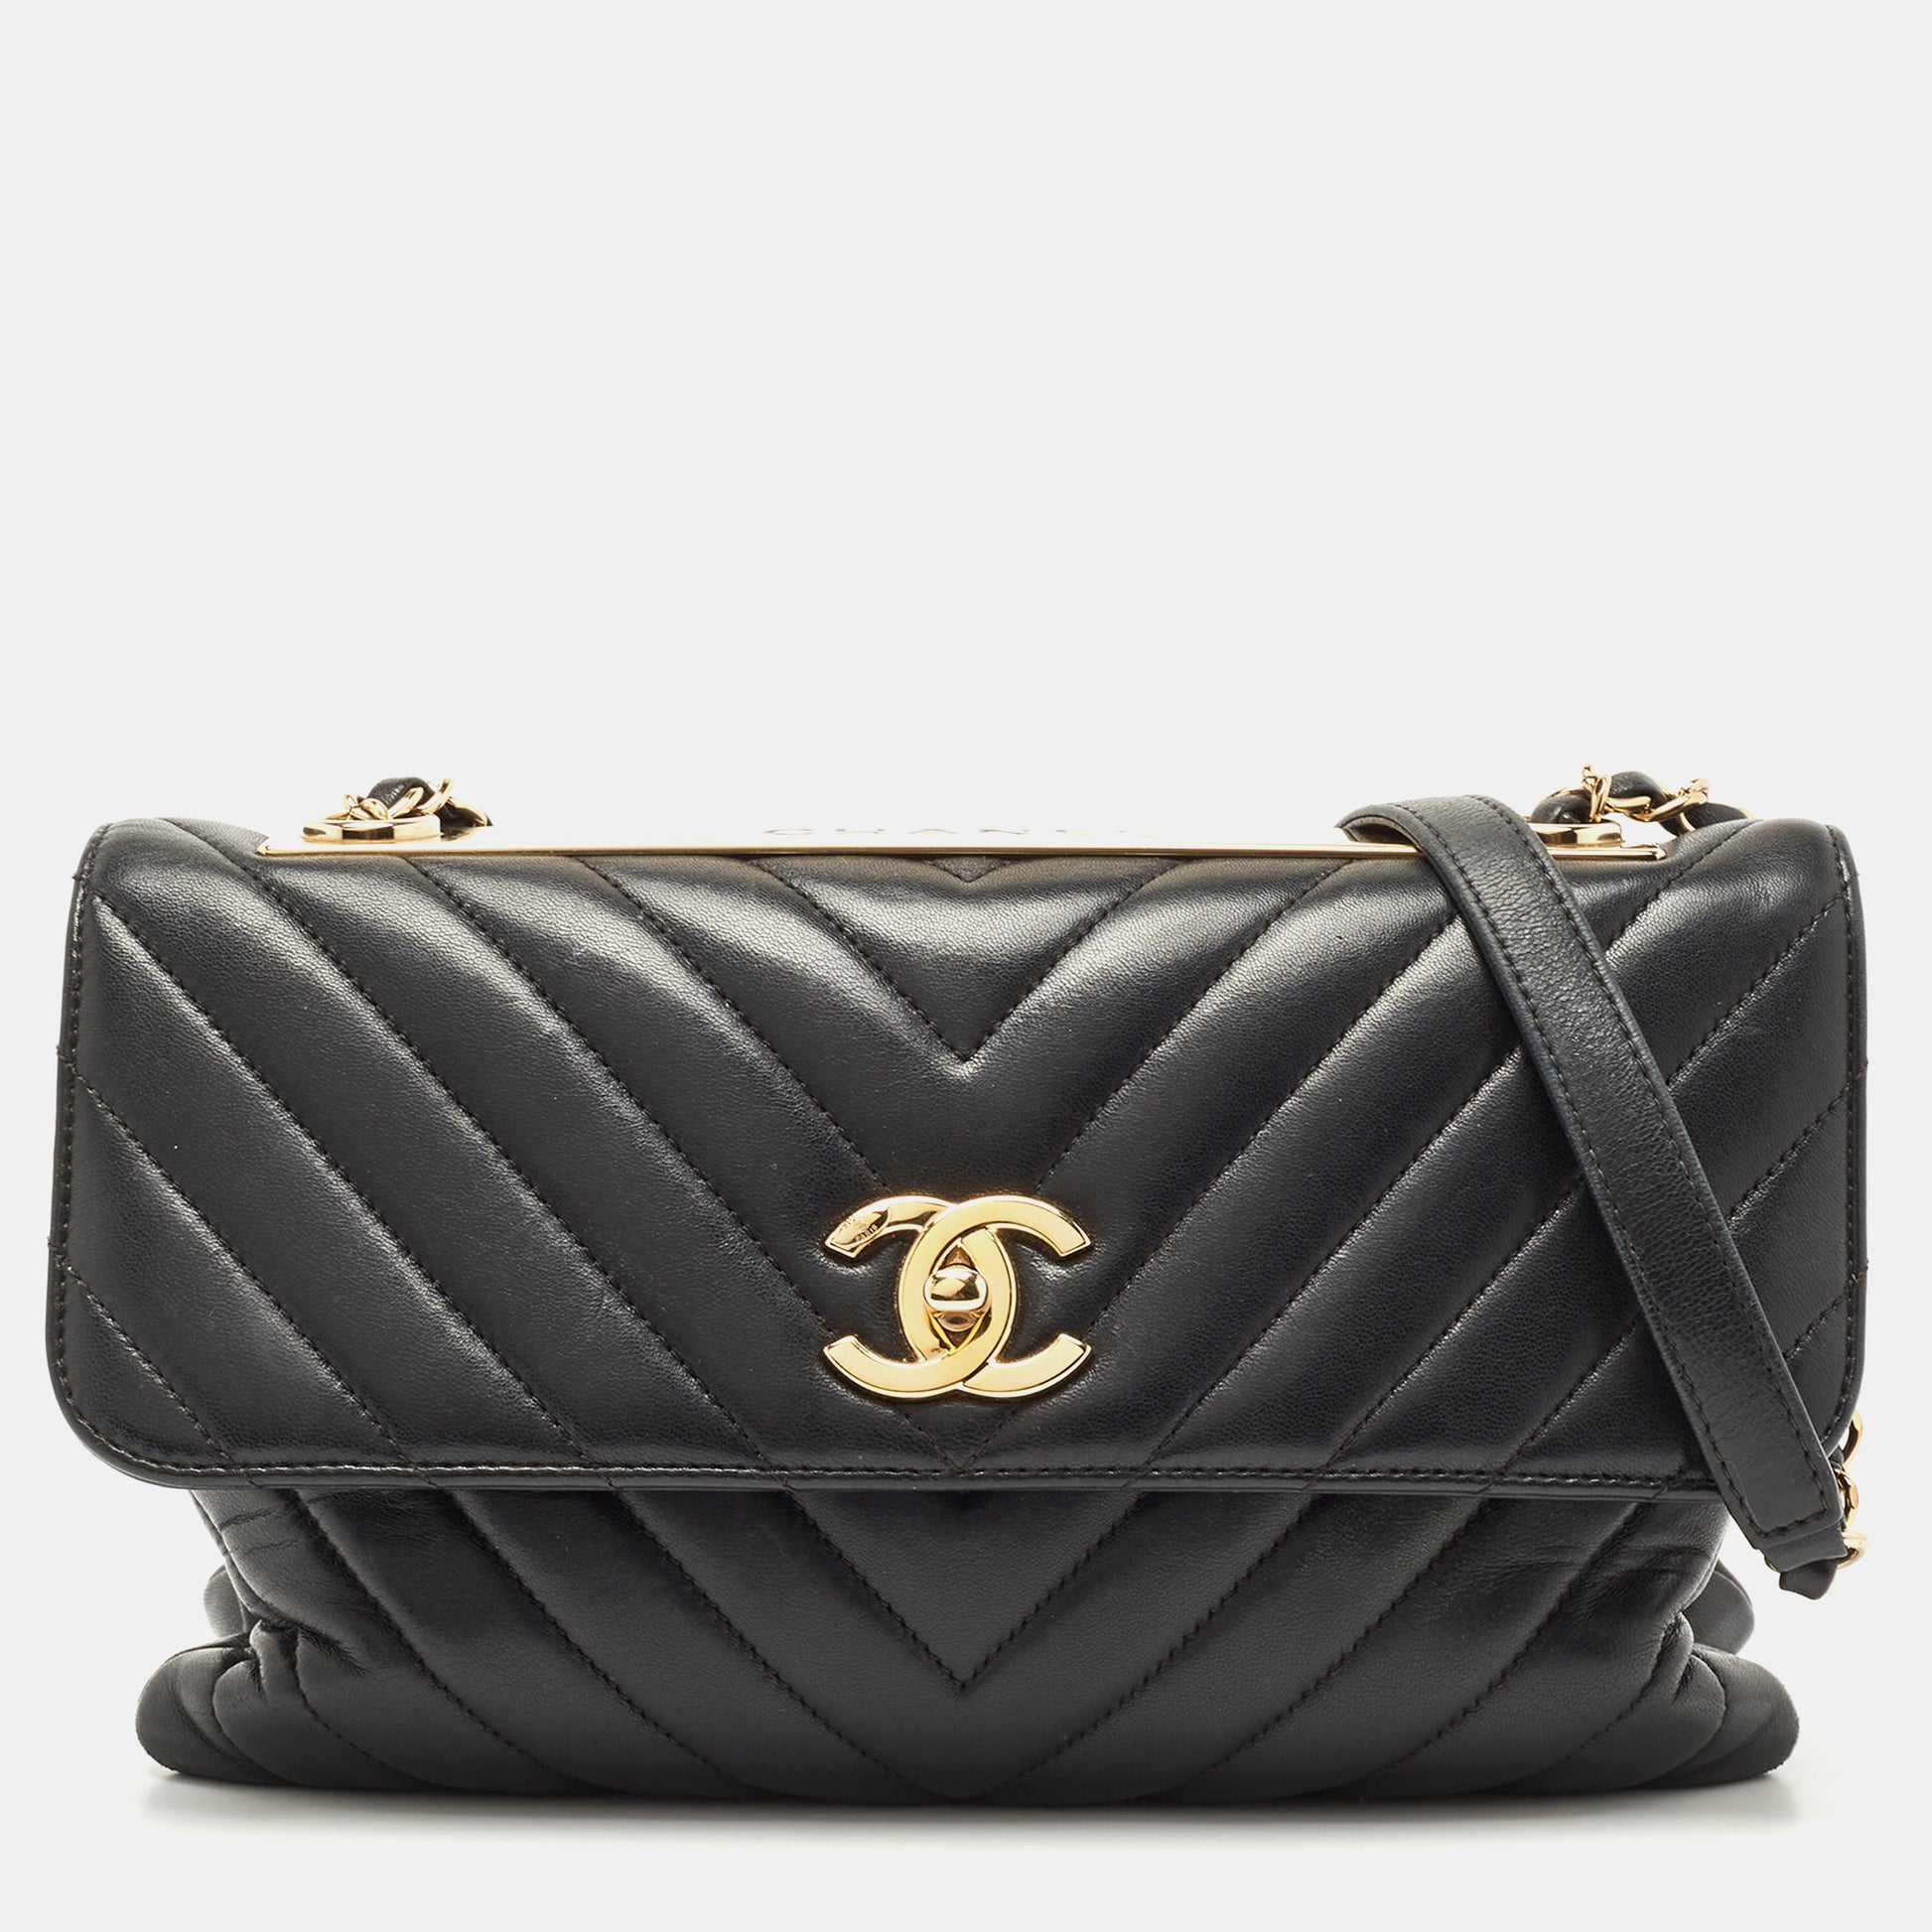 Chanel Black & Gold Quilted Leather Cc Chic Flap Bag, Never